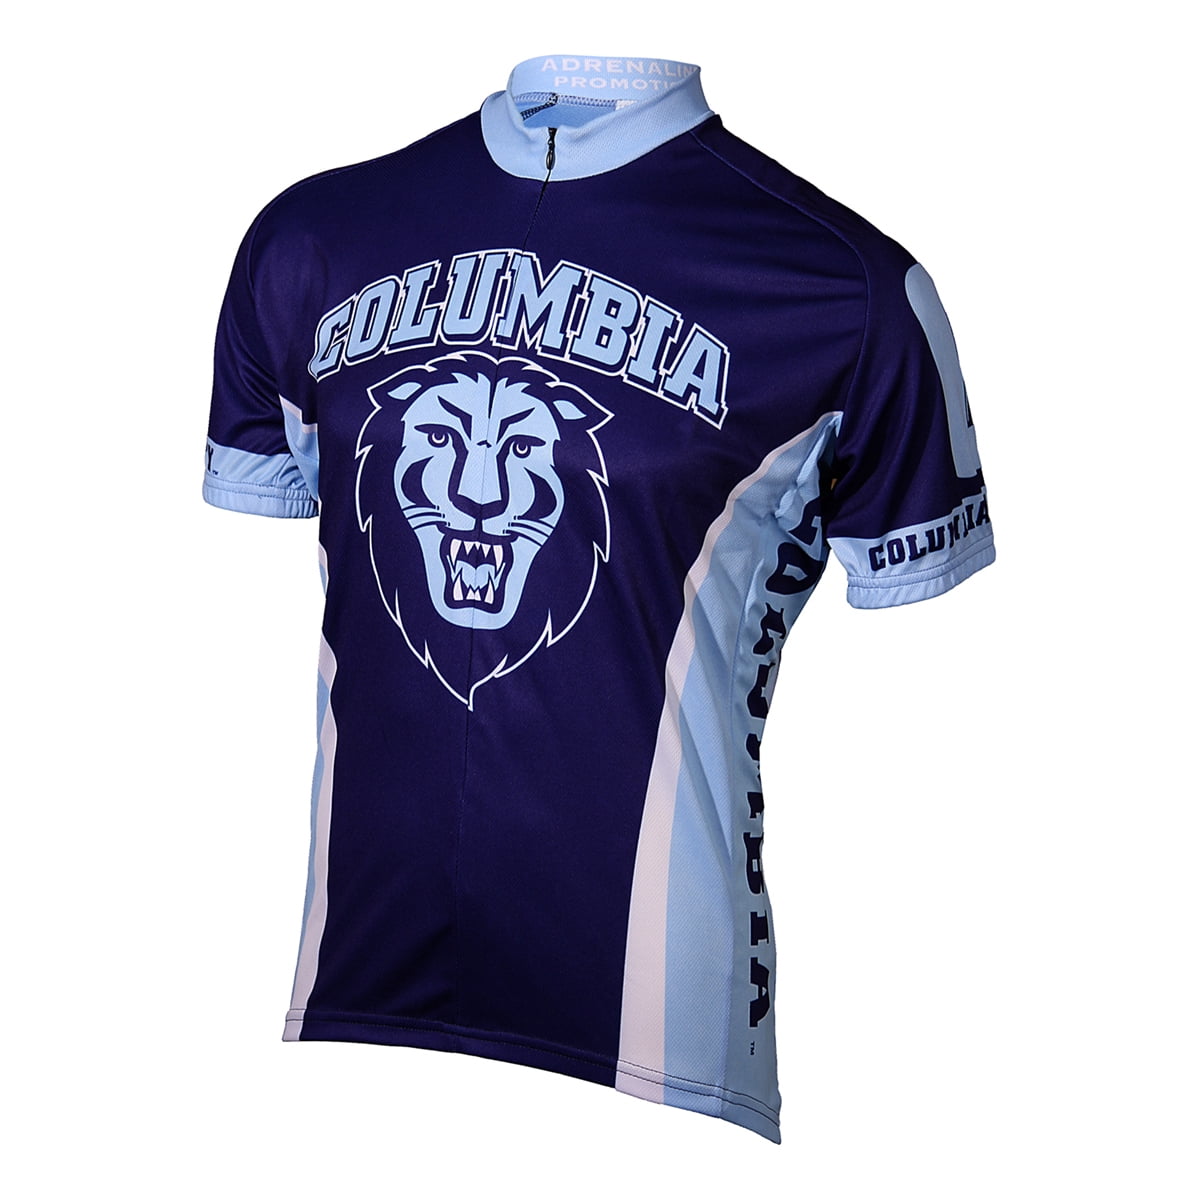 Adrenaline Promotions Columbia University Lions Cycling Jersey